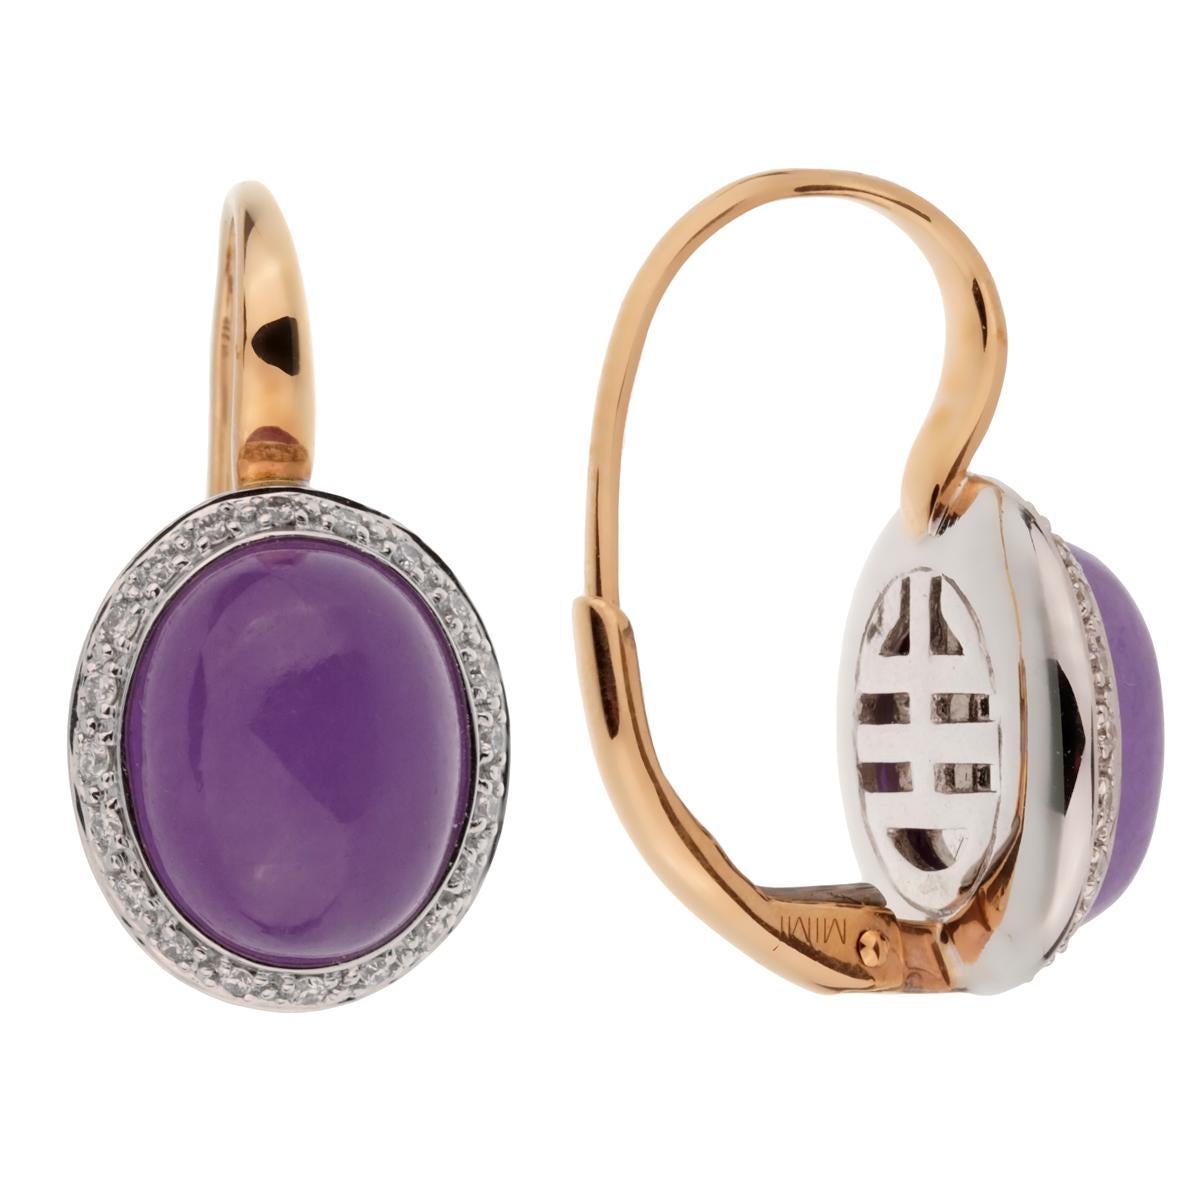 A stunning set of Mimi Milano drop earrings showcasing 8.20ct of Violet Jade encased with .20ct of round brilliant cut diamonds in 18k gold.

Sku: 2496